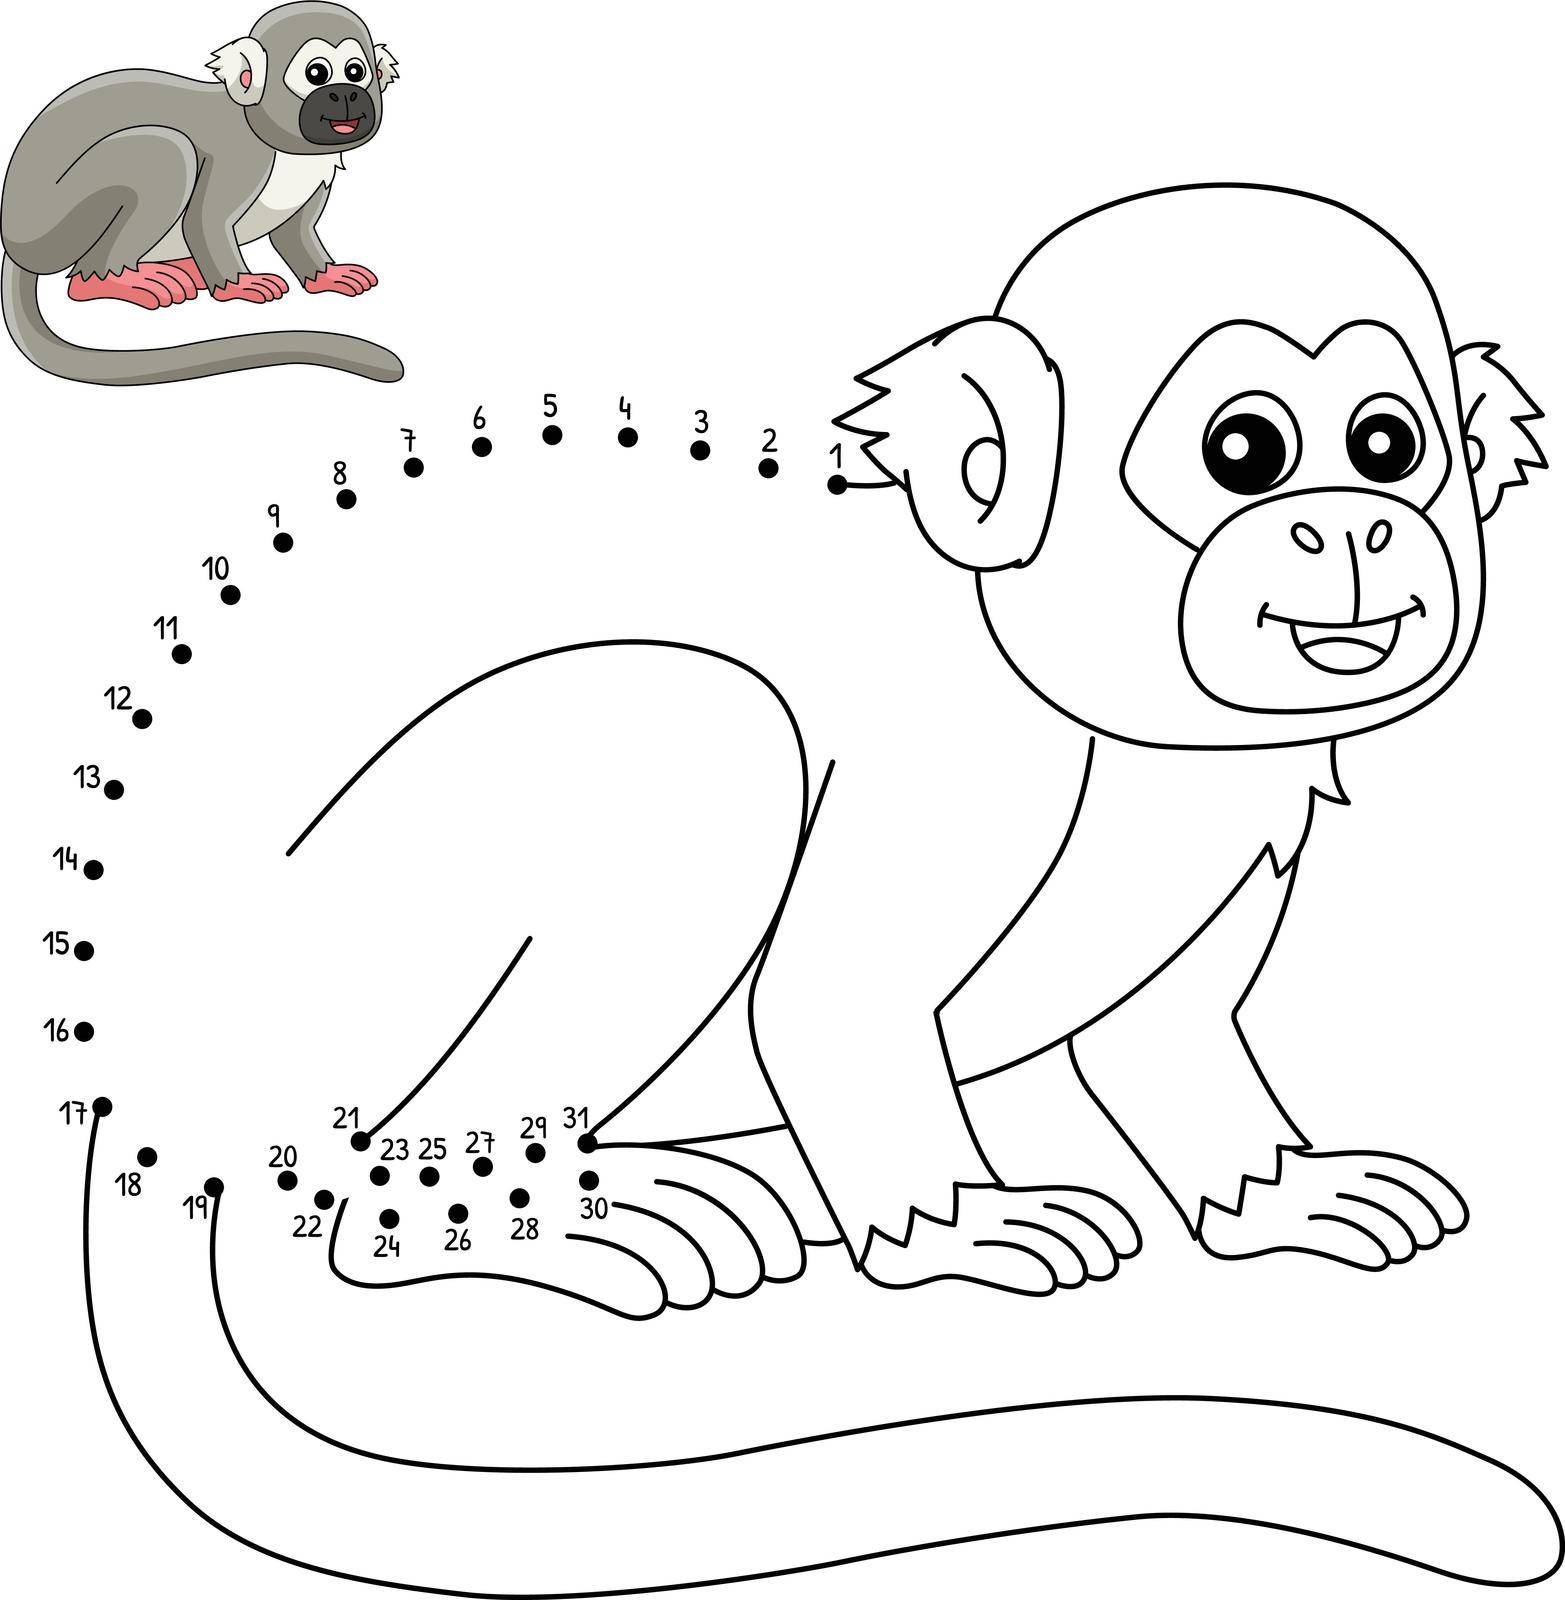 A cute and funny connect-the-dots coloring page of a Squirrel Monkey Animal. Provides hours of coloring fun for children. Color, this page is very easy. Suitable for little kids and toddlers.